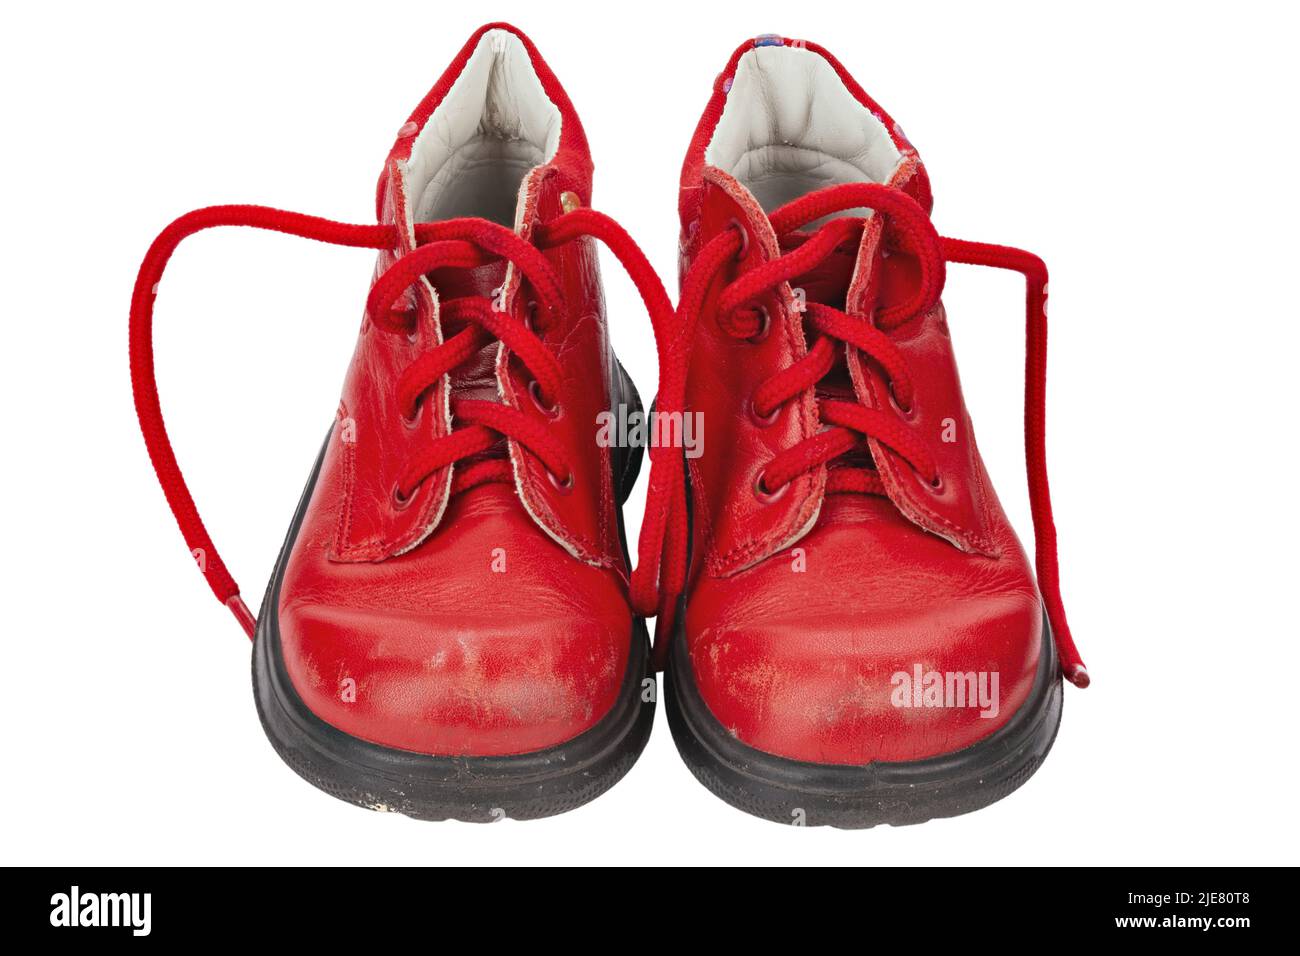 Children's shoes of red color isolated on white background. Old shoes ...